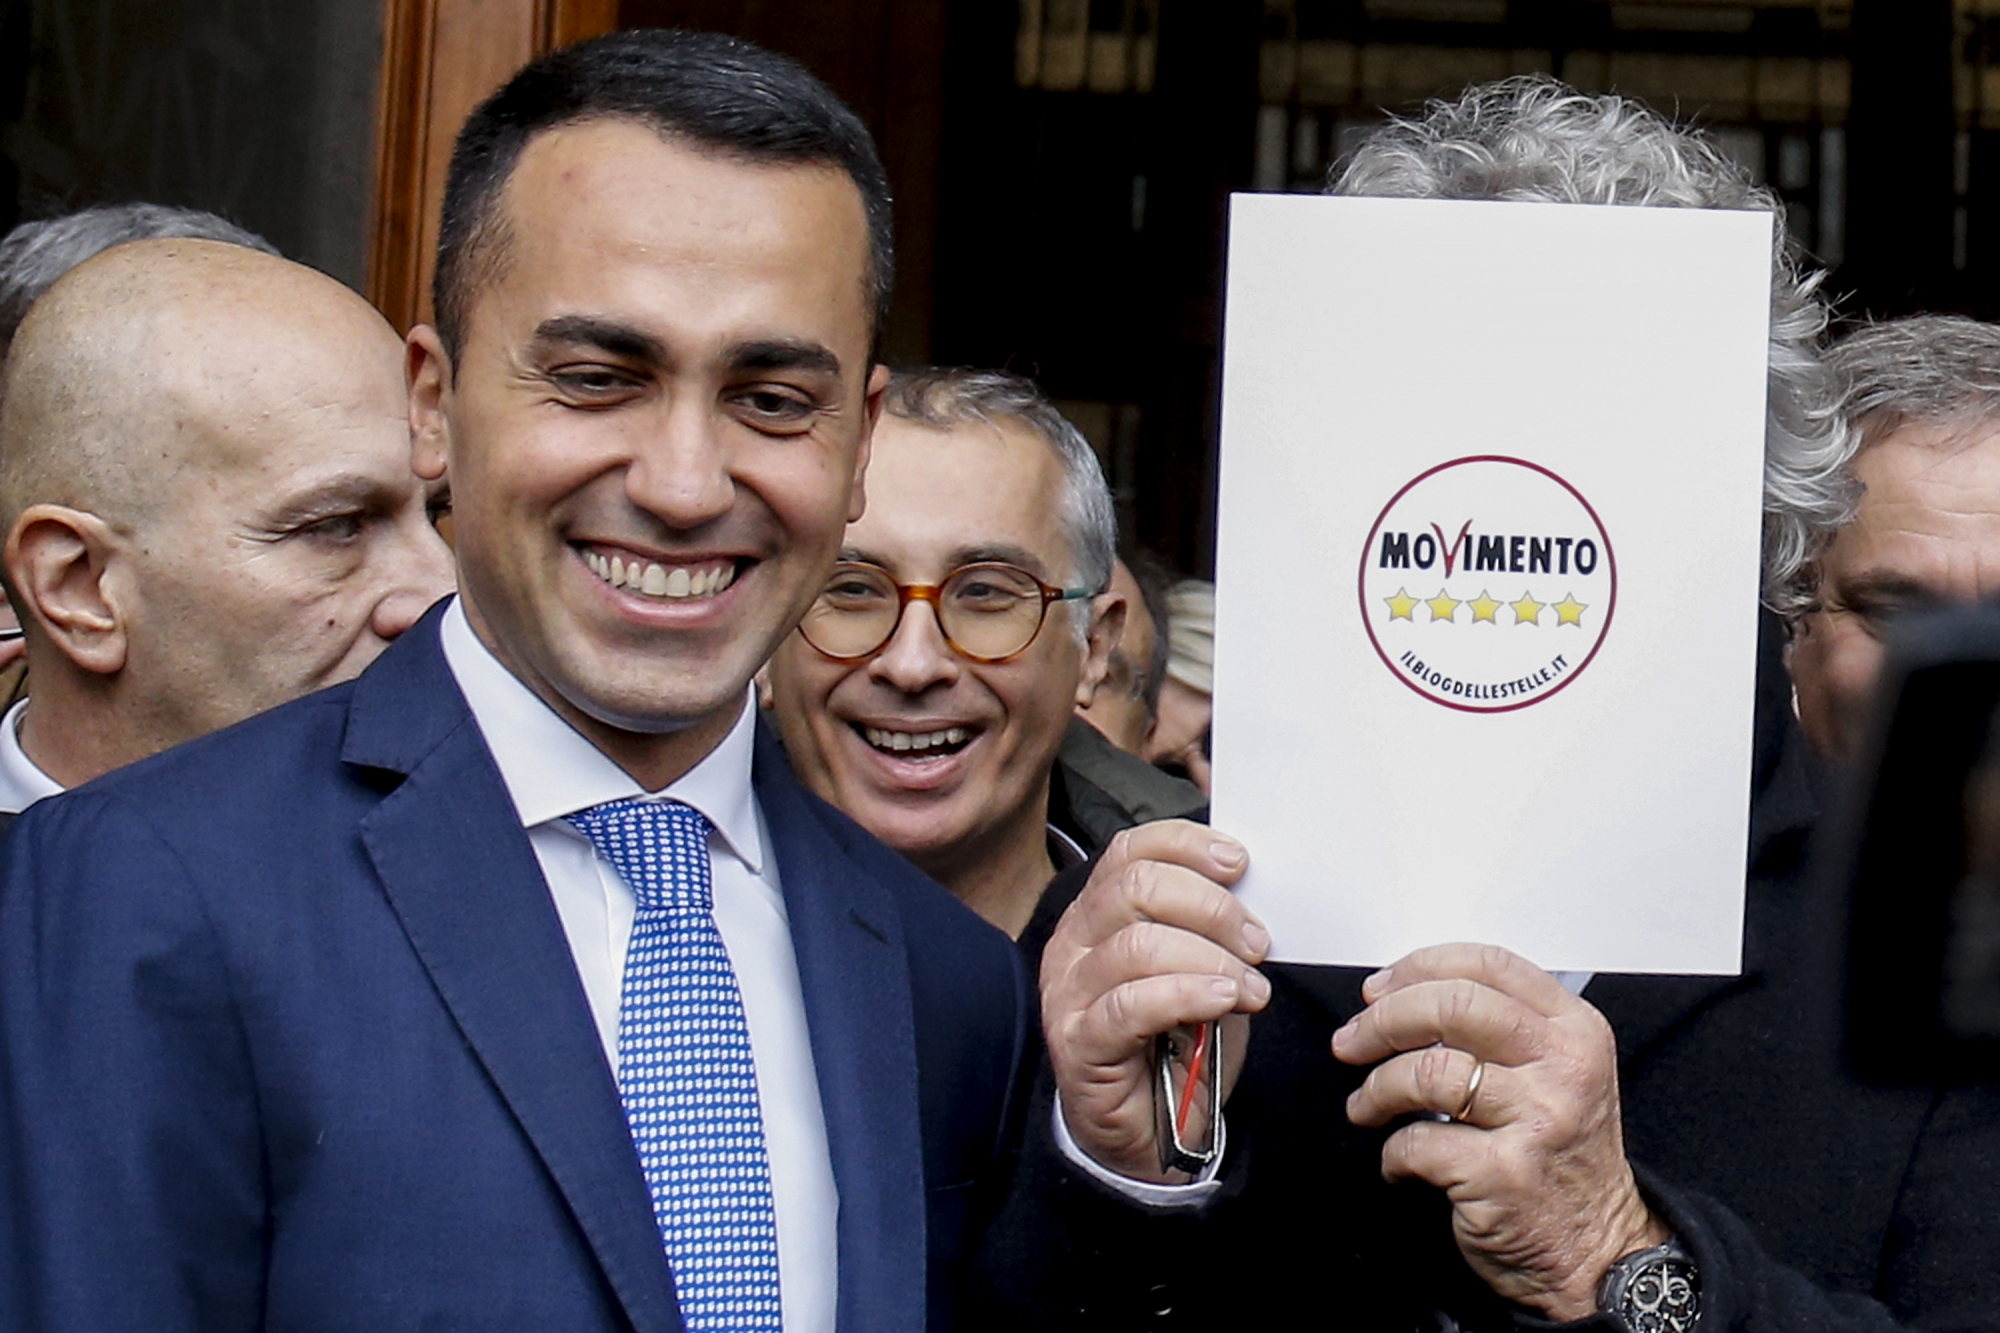 5-Star Movement's prime minister candidate Luigi Di Maio and founder Beppe Grillo (right) hold the official symbol they registered for the upcoming elections in Rome, 19.01.2018. (KEYSTONE/CAMERA PRESS/Fabio Frustaci)